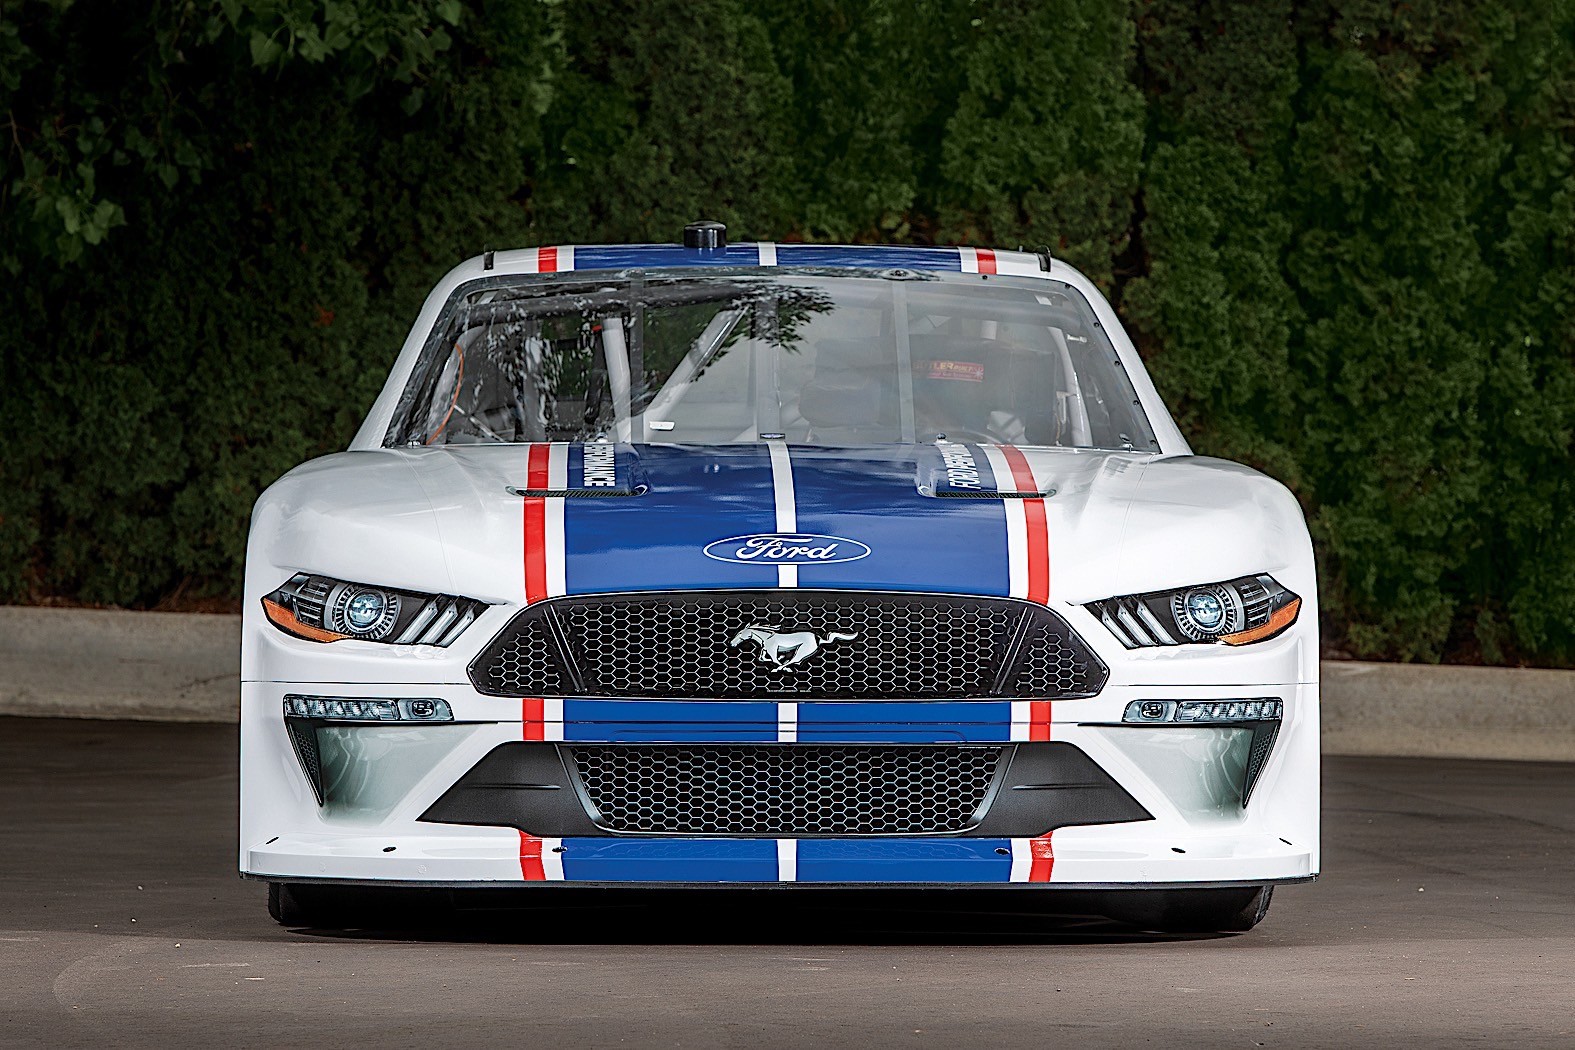 New Ford Mustang NASCAR Xfinity Series Unveiled, Race Debut in February